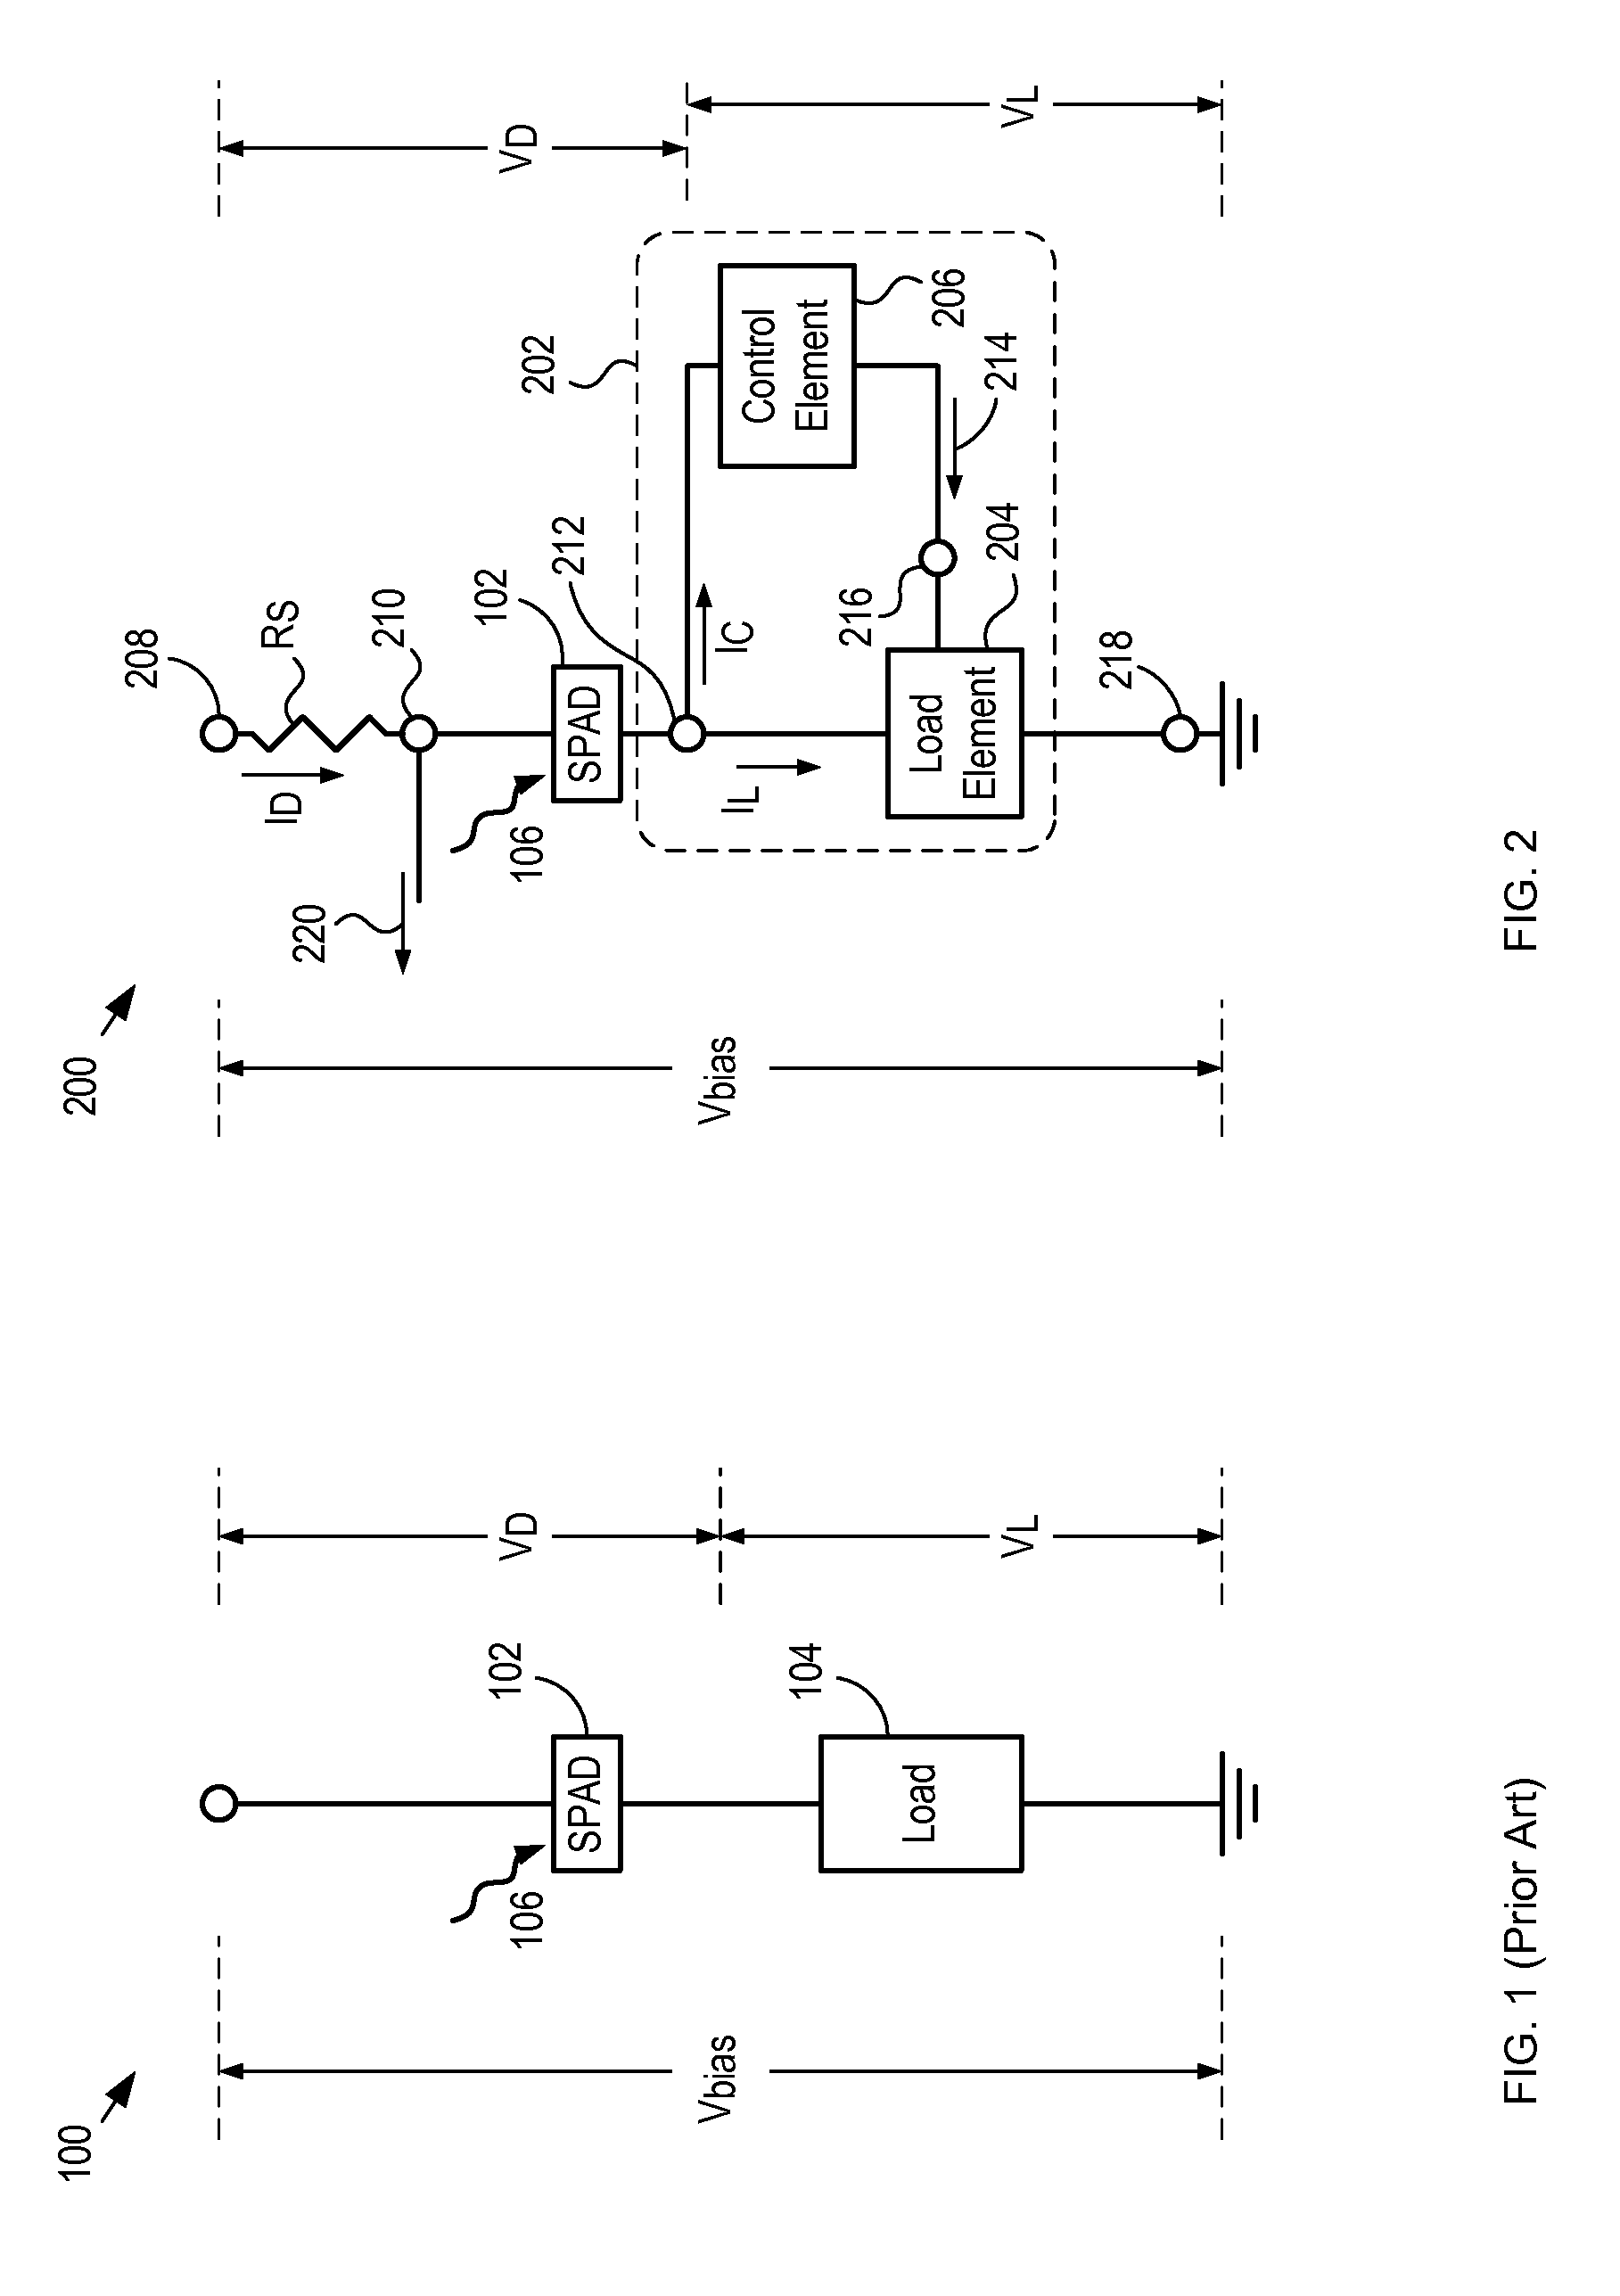 Two-state negative feedback avalanche diode having a control element for determining load state